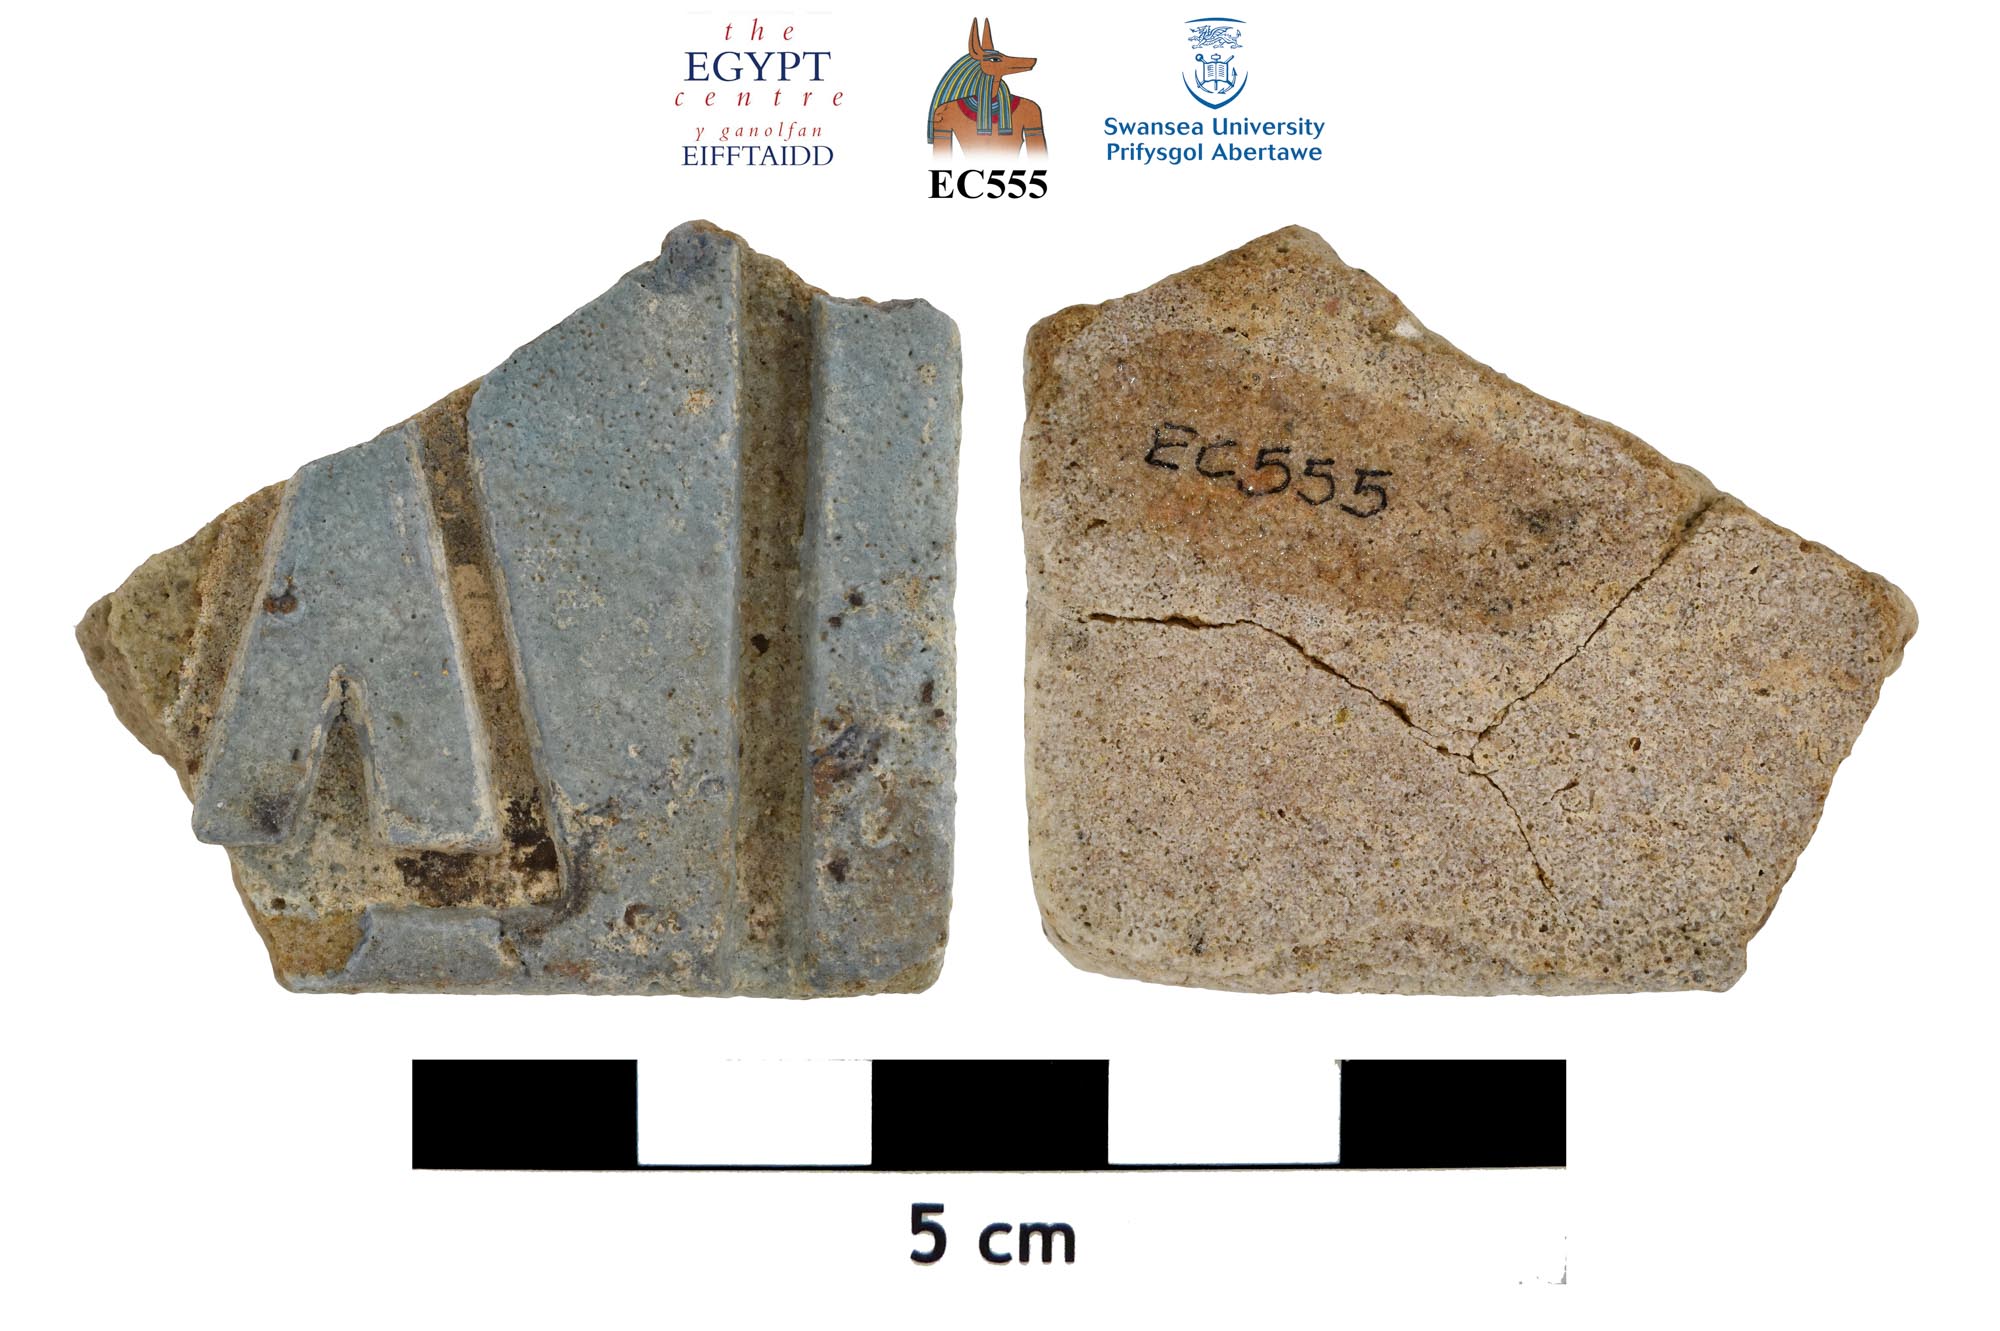 Image for: Fragment of a faience object